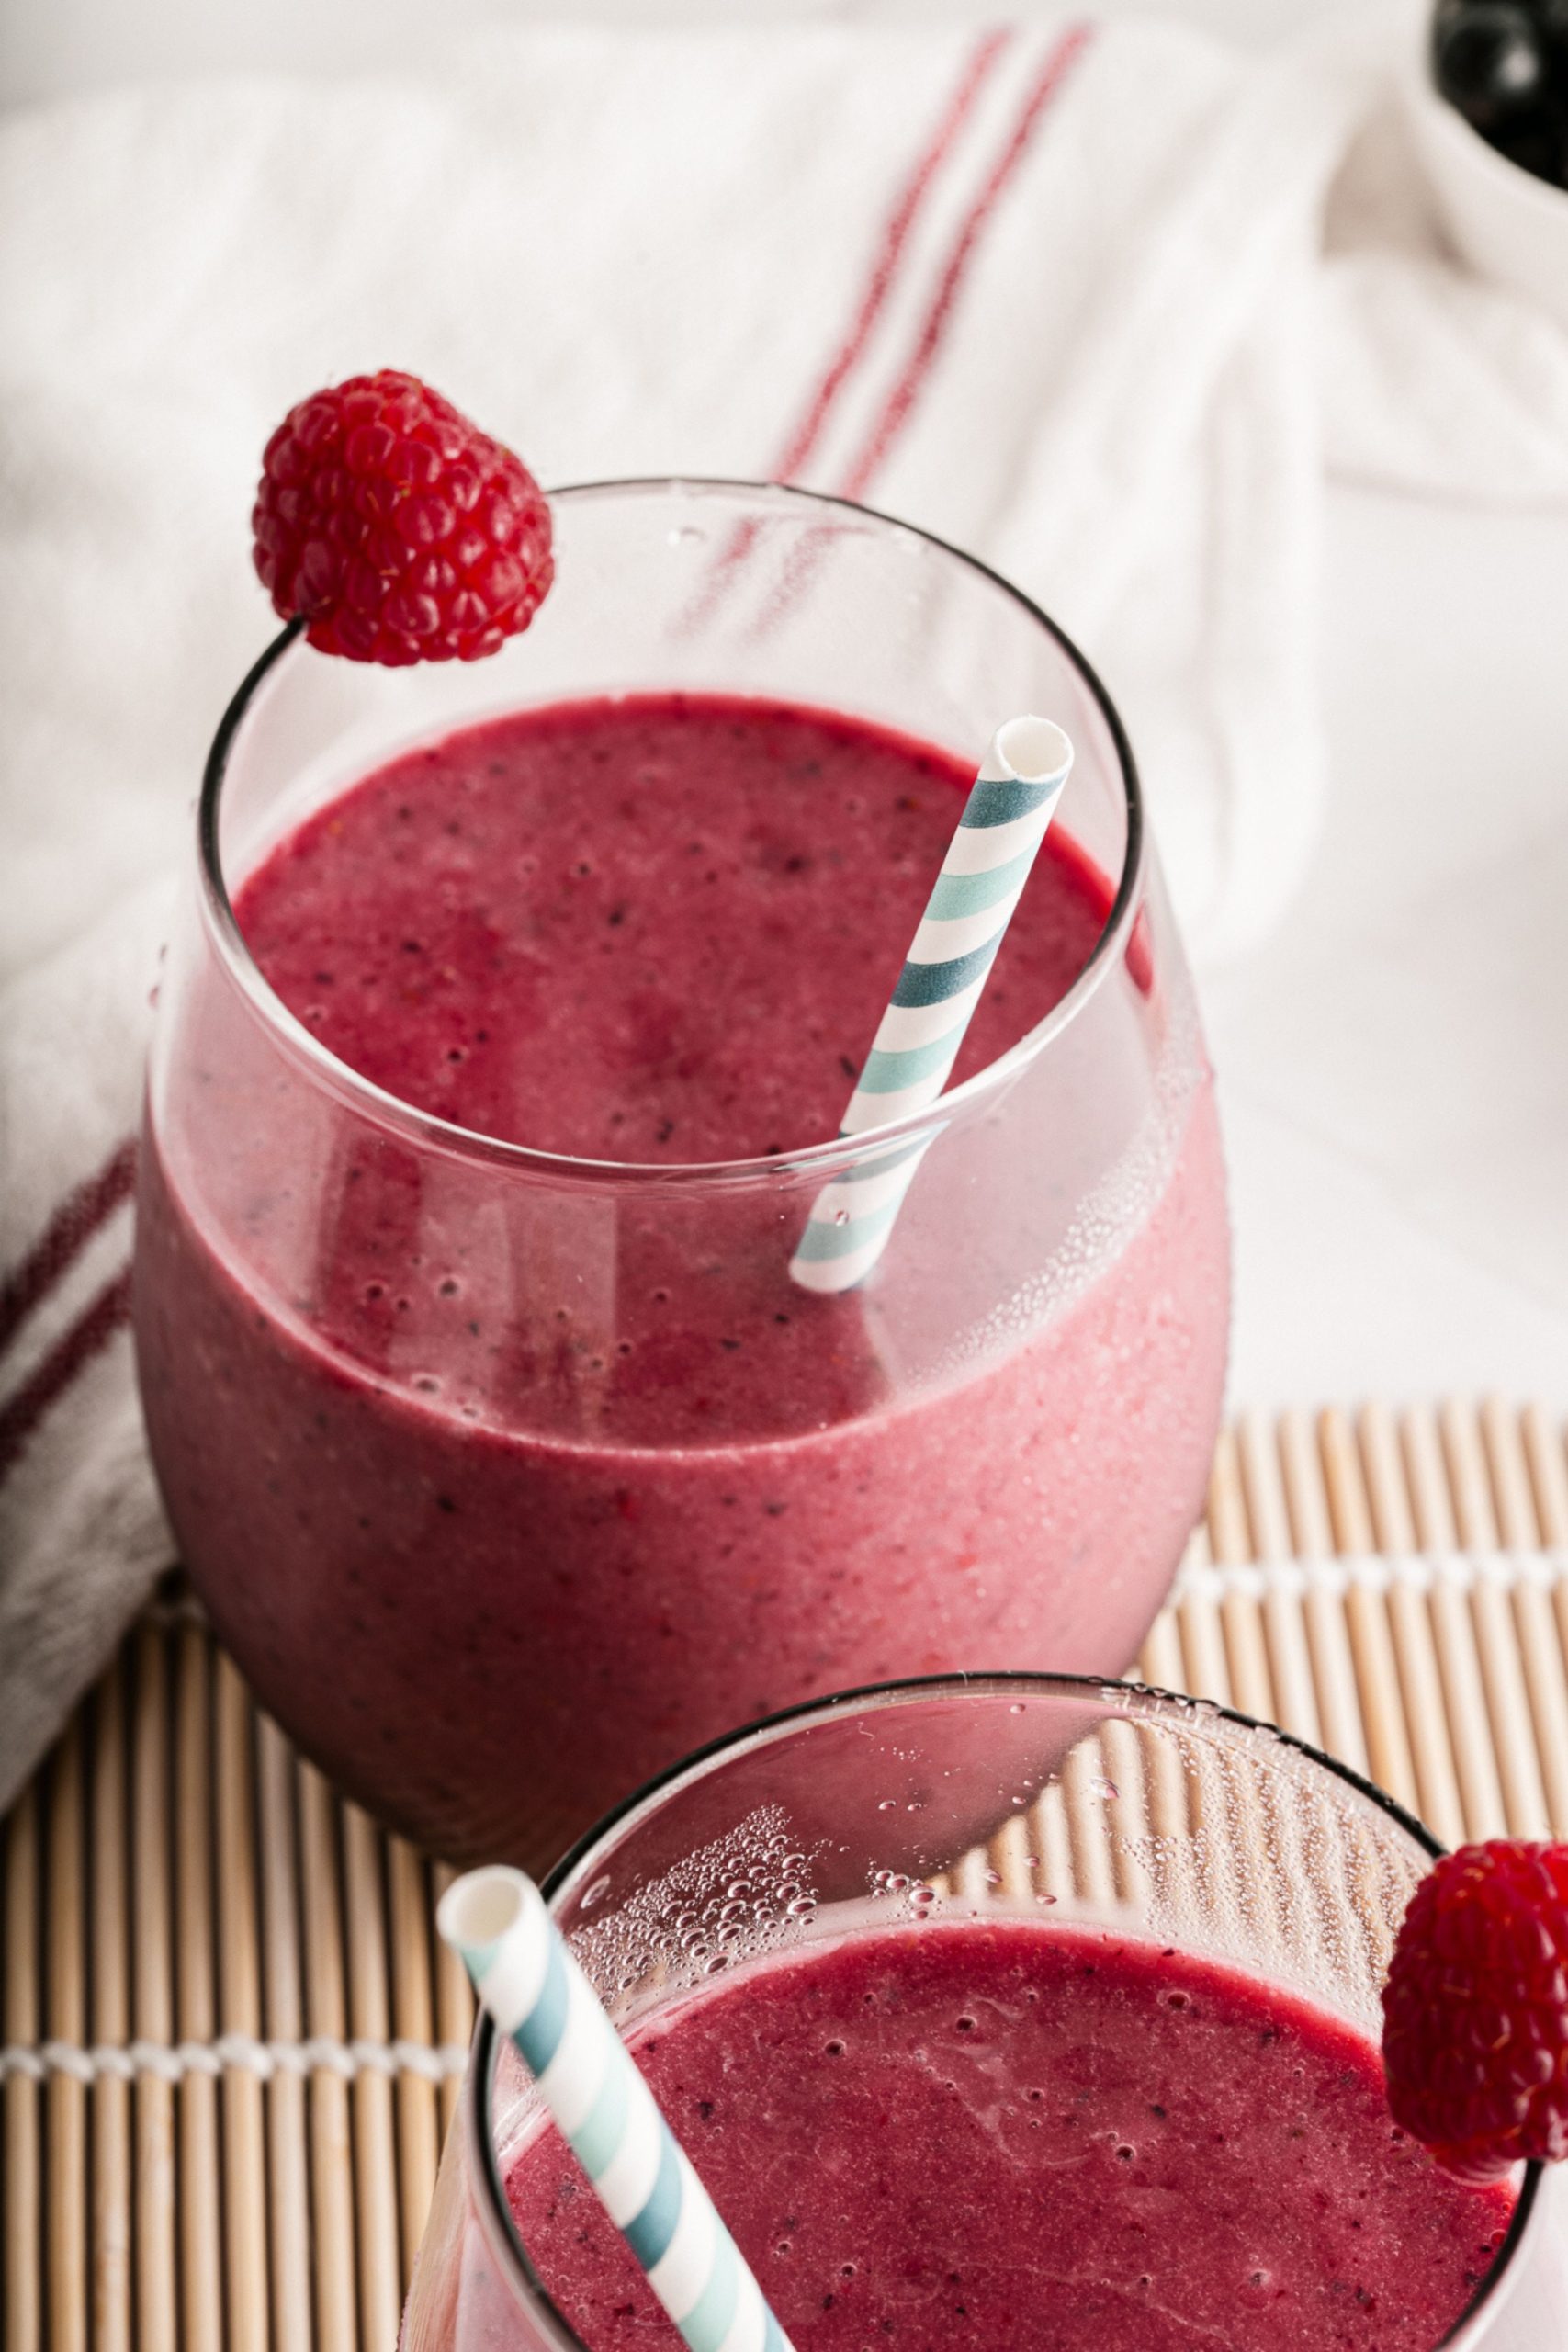 This quick and easy Mixed Berry Smoothie is the perfect breakfast or mid-day snack. Super refreshing to enjoy in the summer. This smoothie is vegan, raw, and ready to enjoy in under 10 minutes!